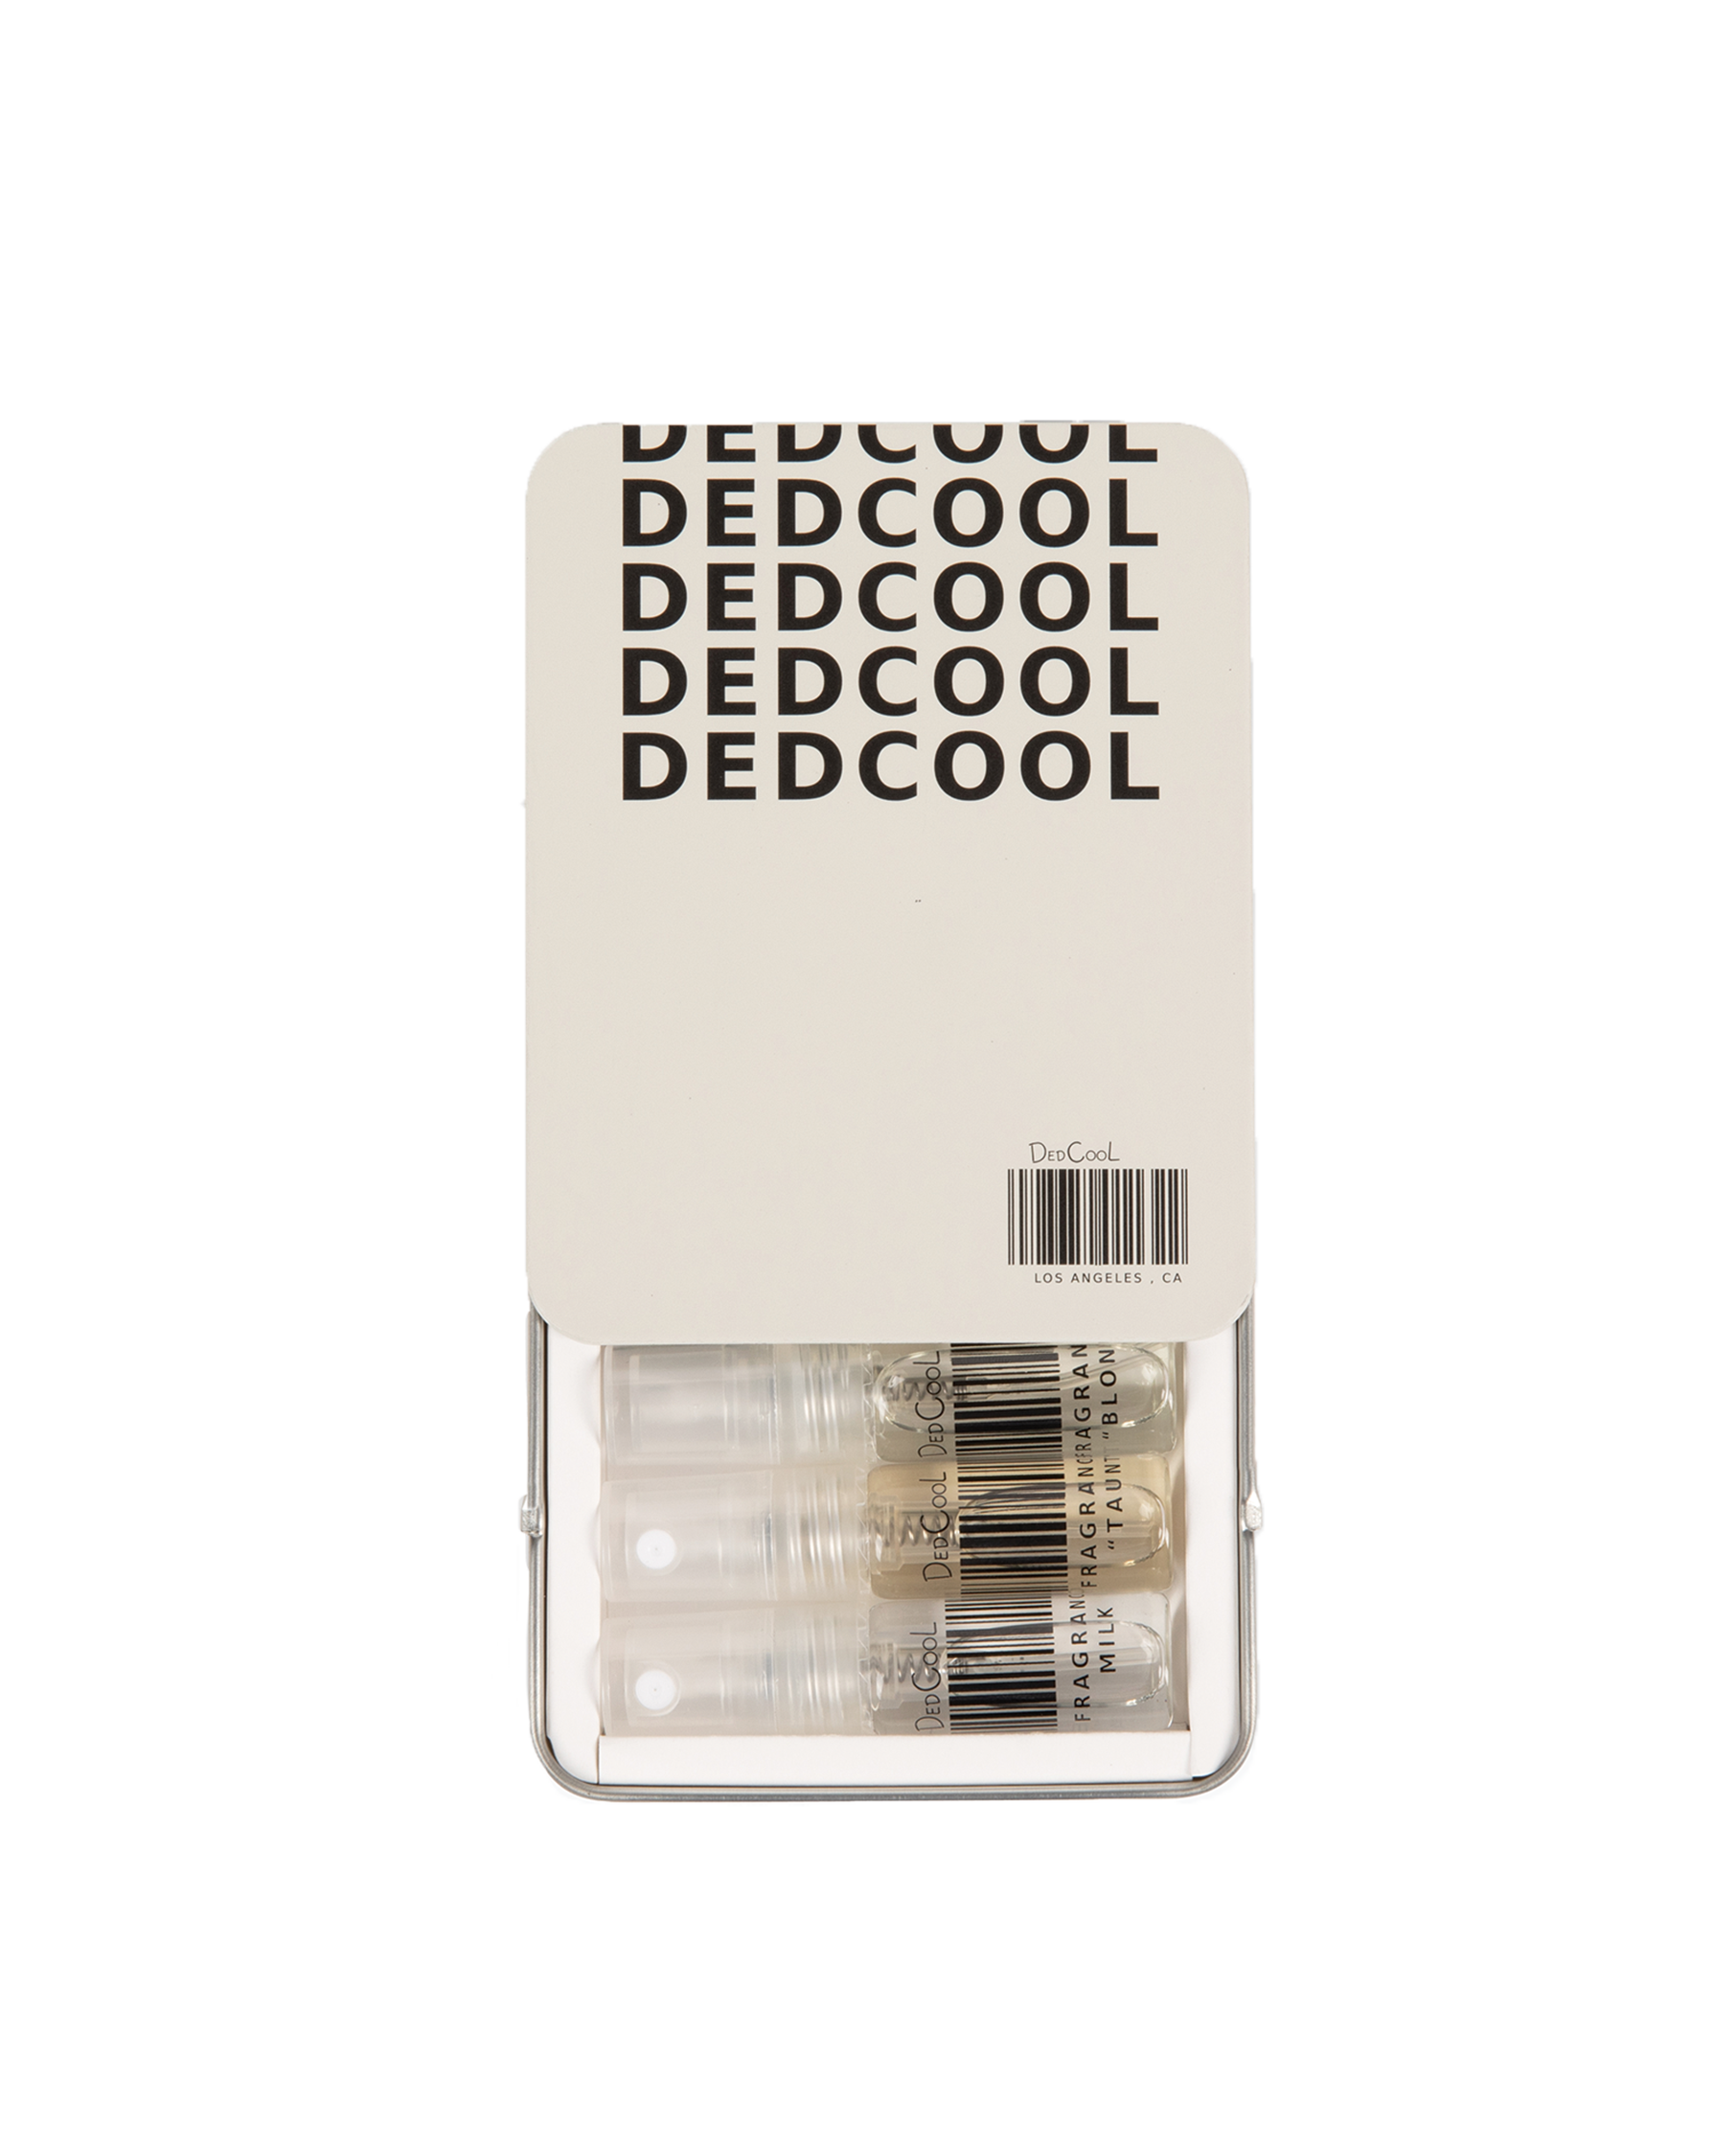 DedCool Best Sellers Sample Pack + 20% off your full size purchase